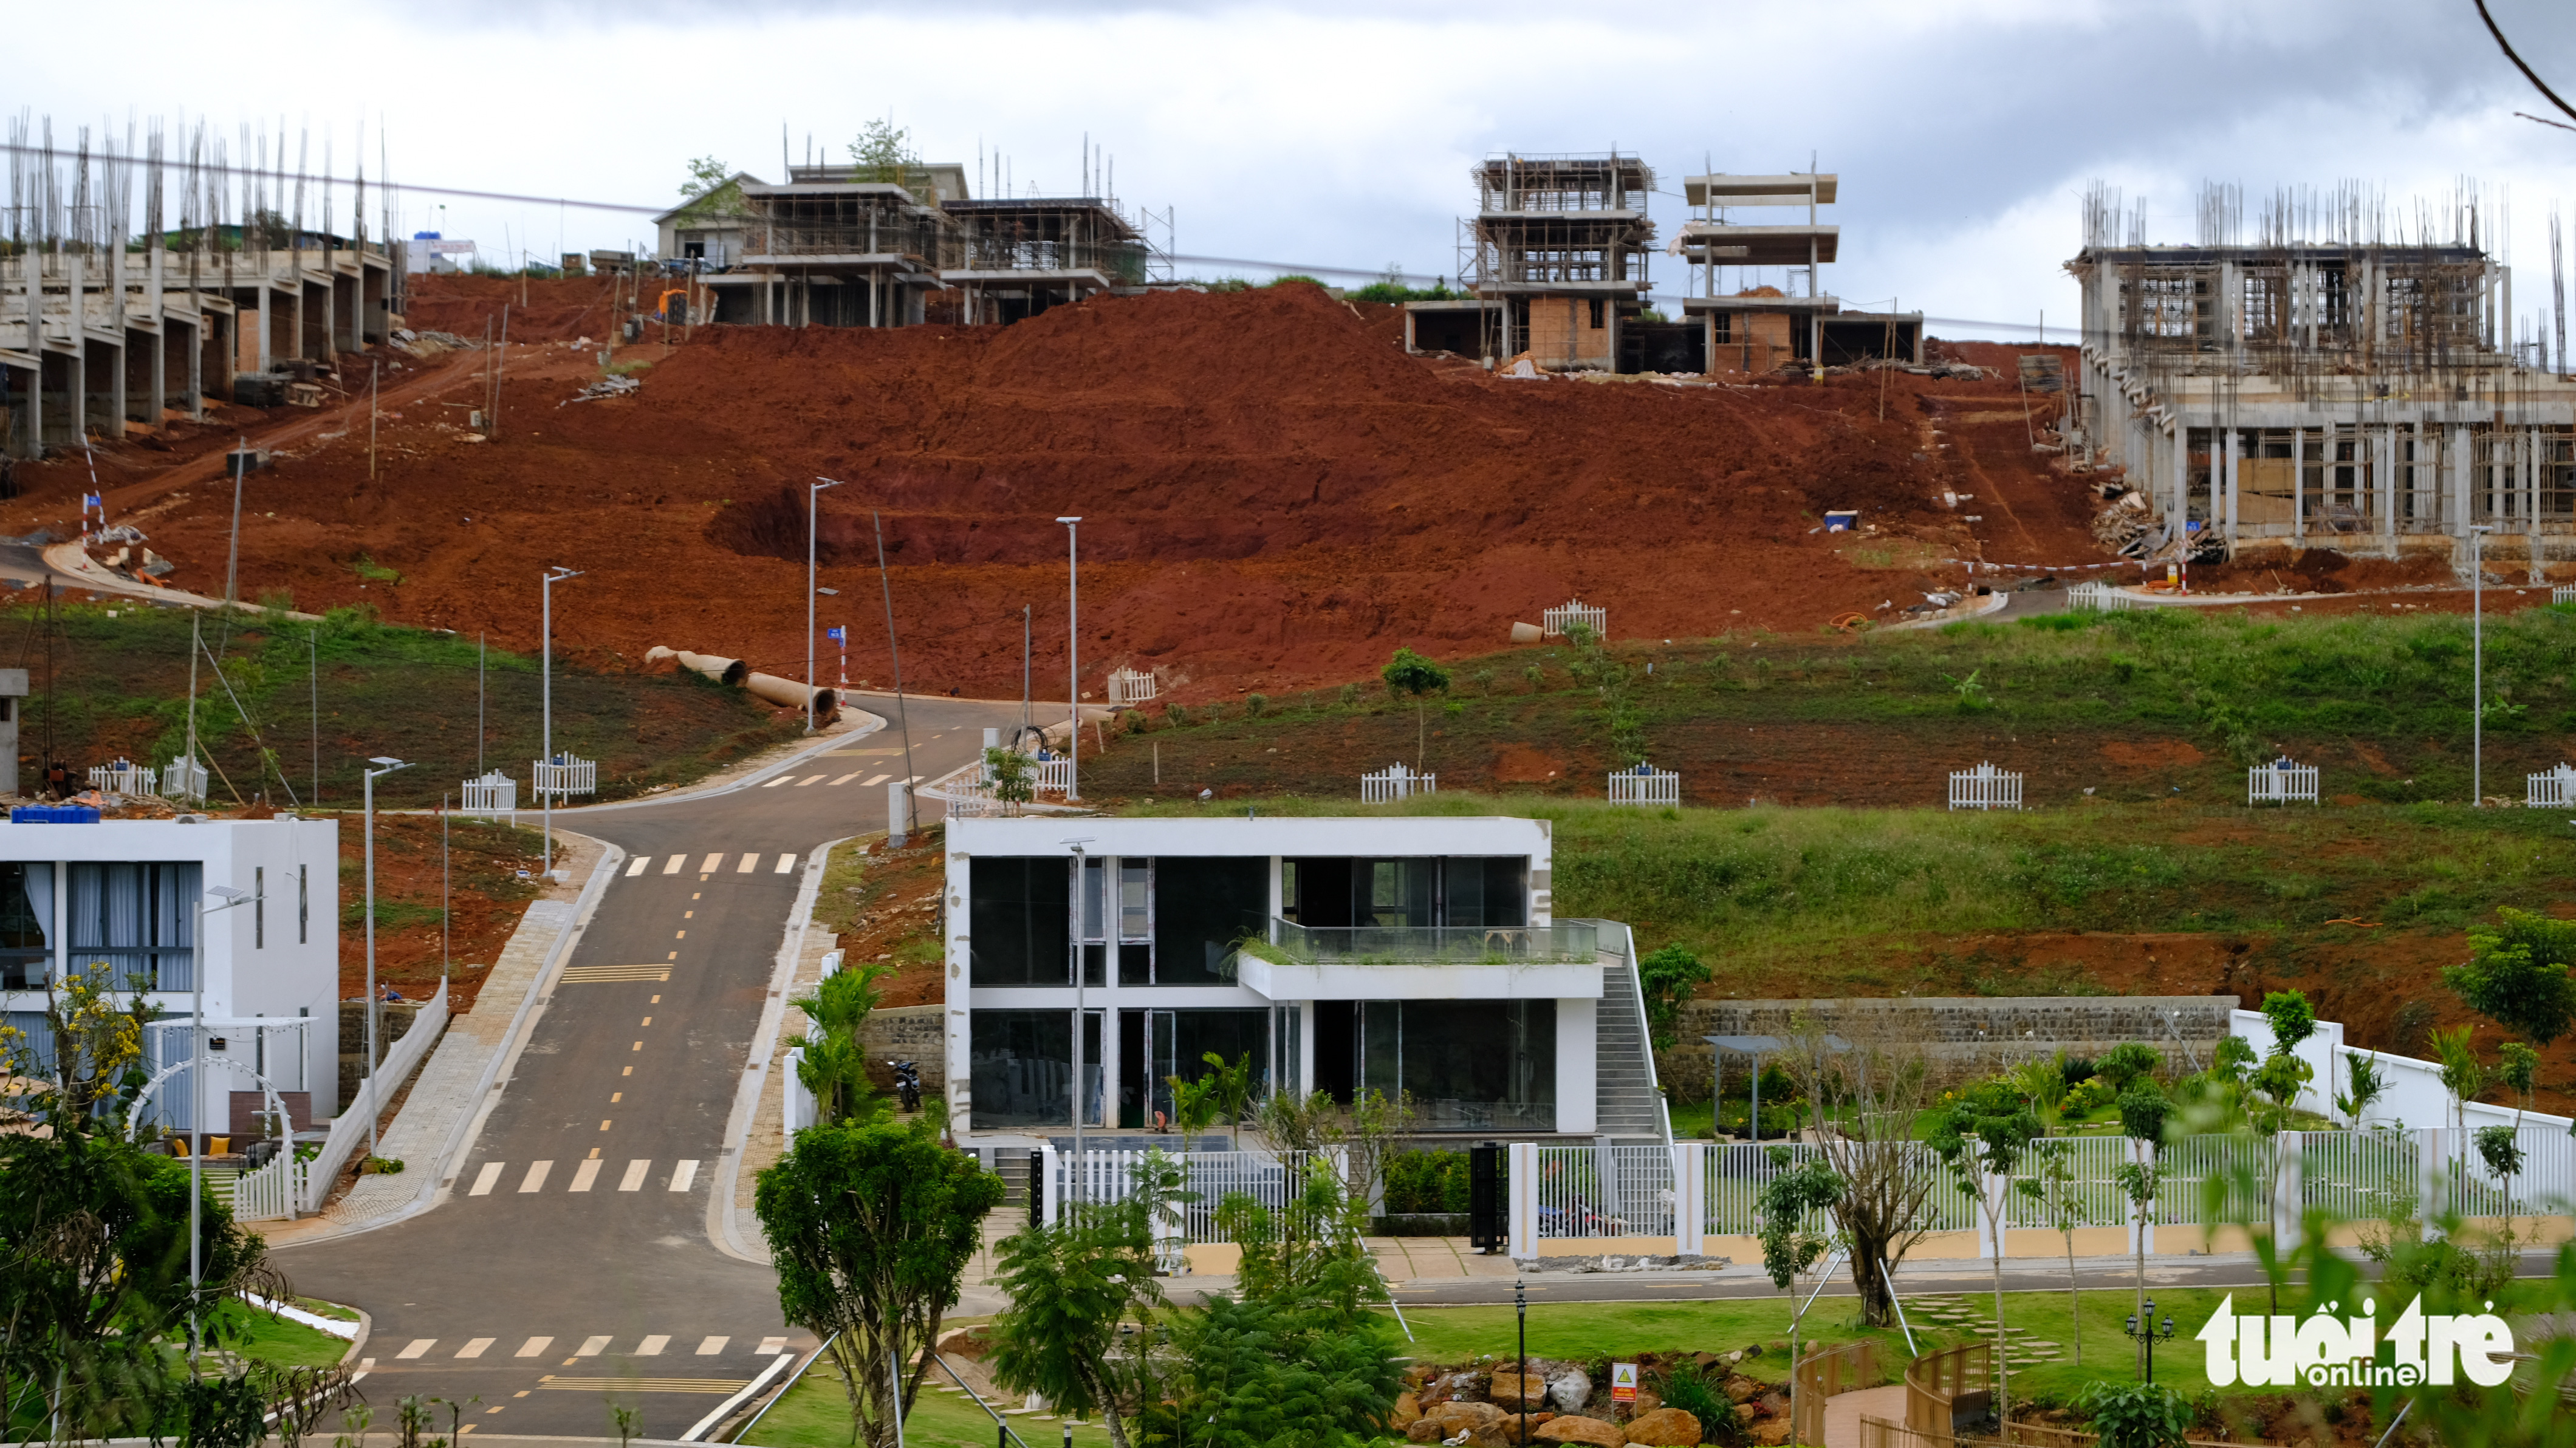 Illicit property projects booming on tea hills in Vietnam’s Central Highlands province